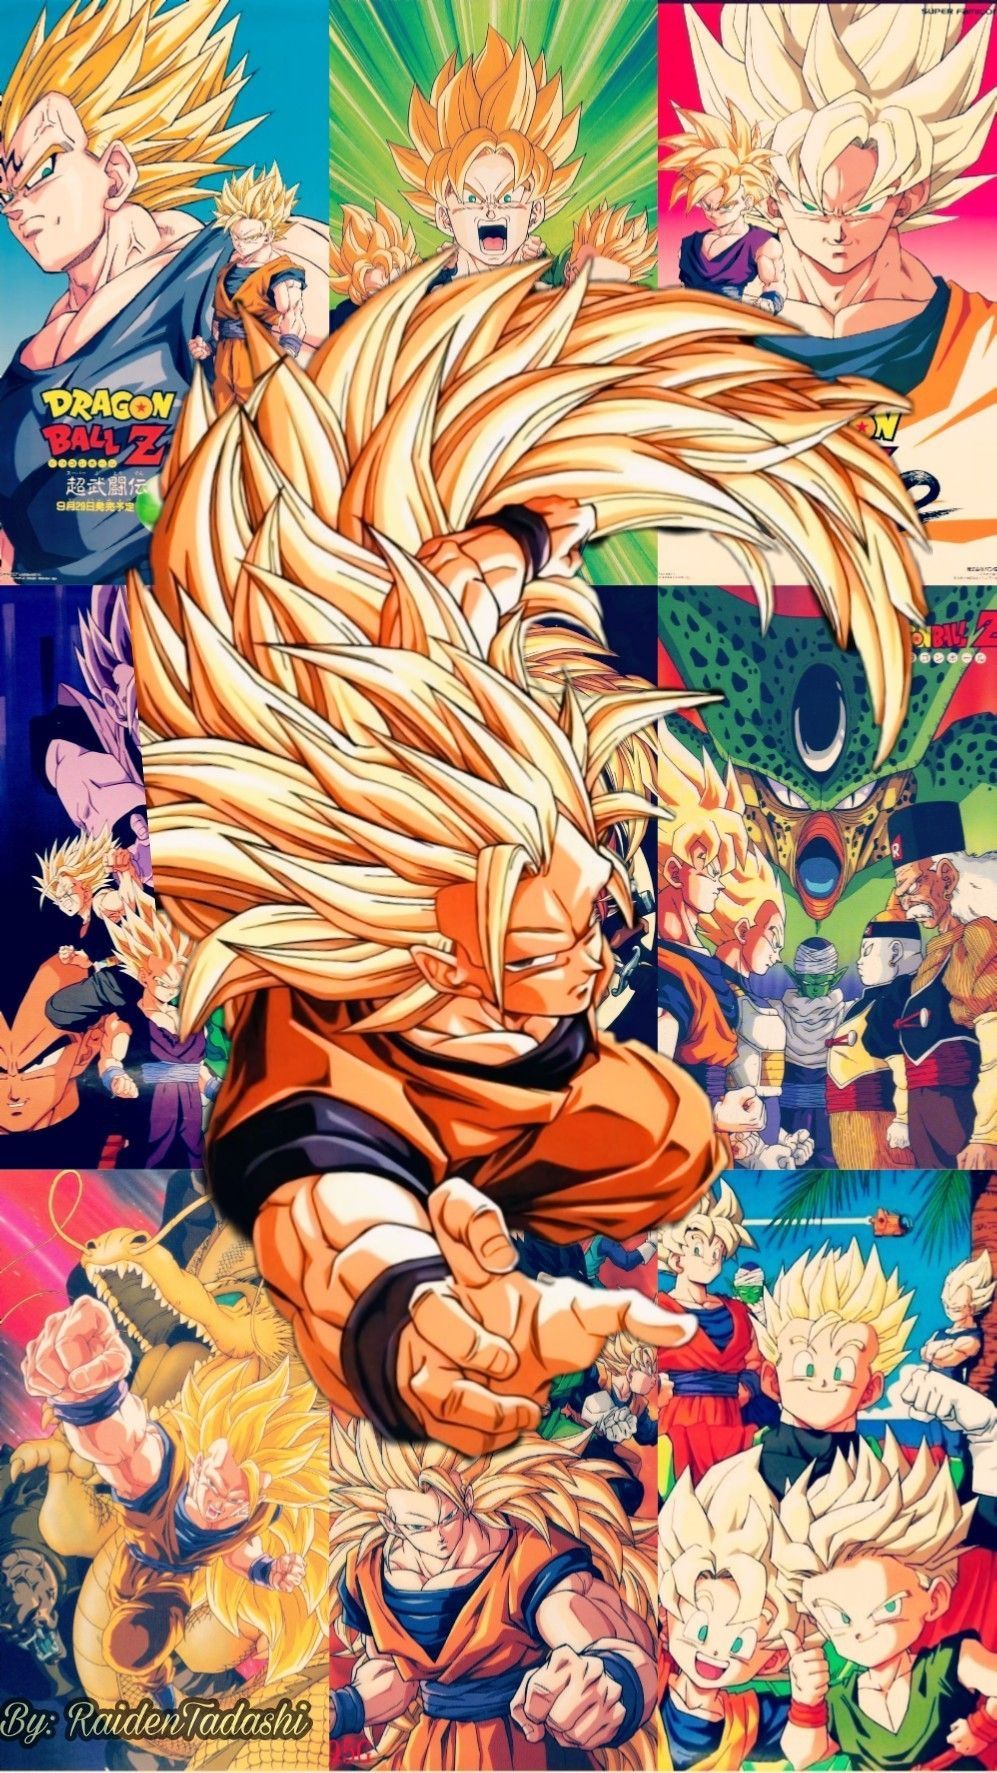 Dragon Ball wallpaper (with posters from 90's in background) made by RaidenTadashi. Dragon ball artwork, Anime dragon ball super, Dragon ball super manga